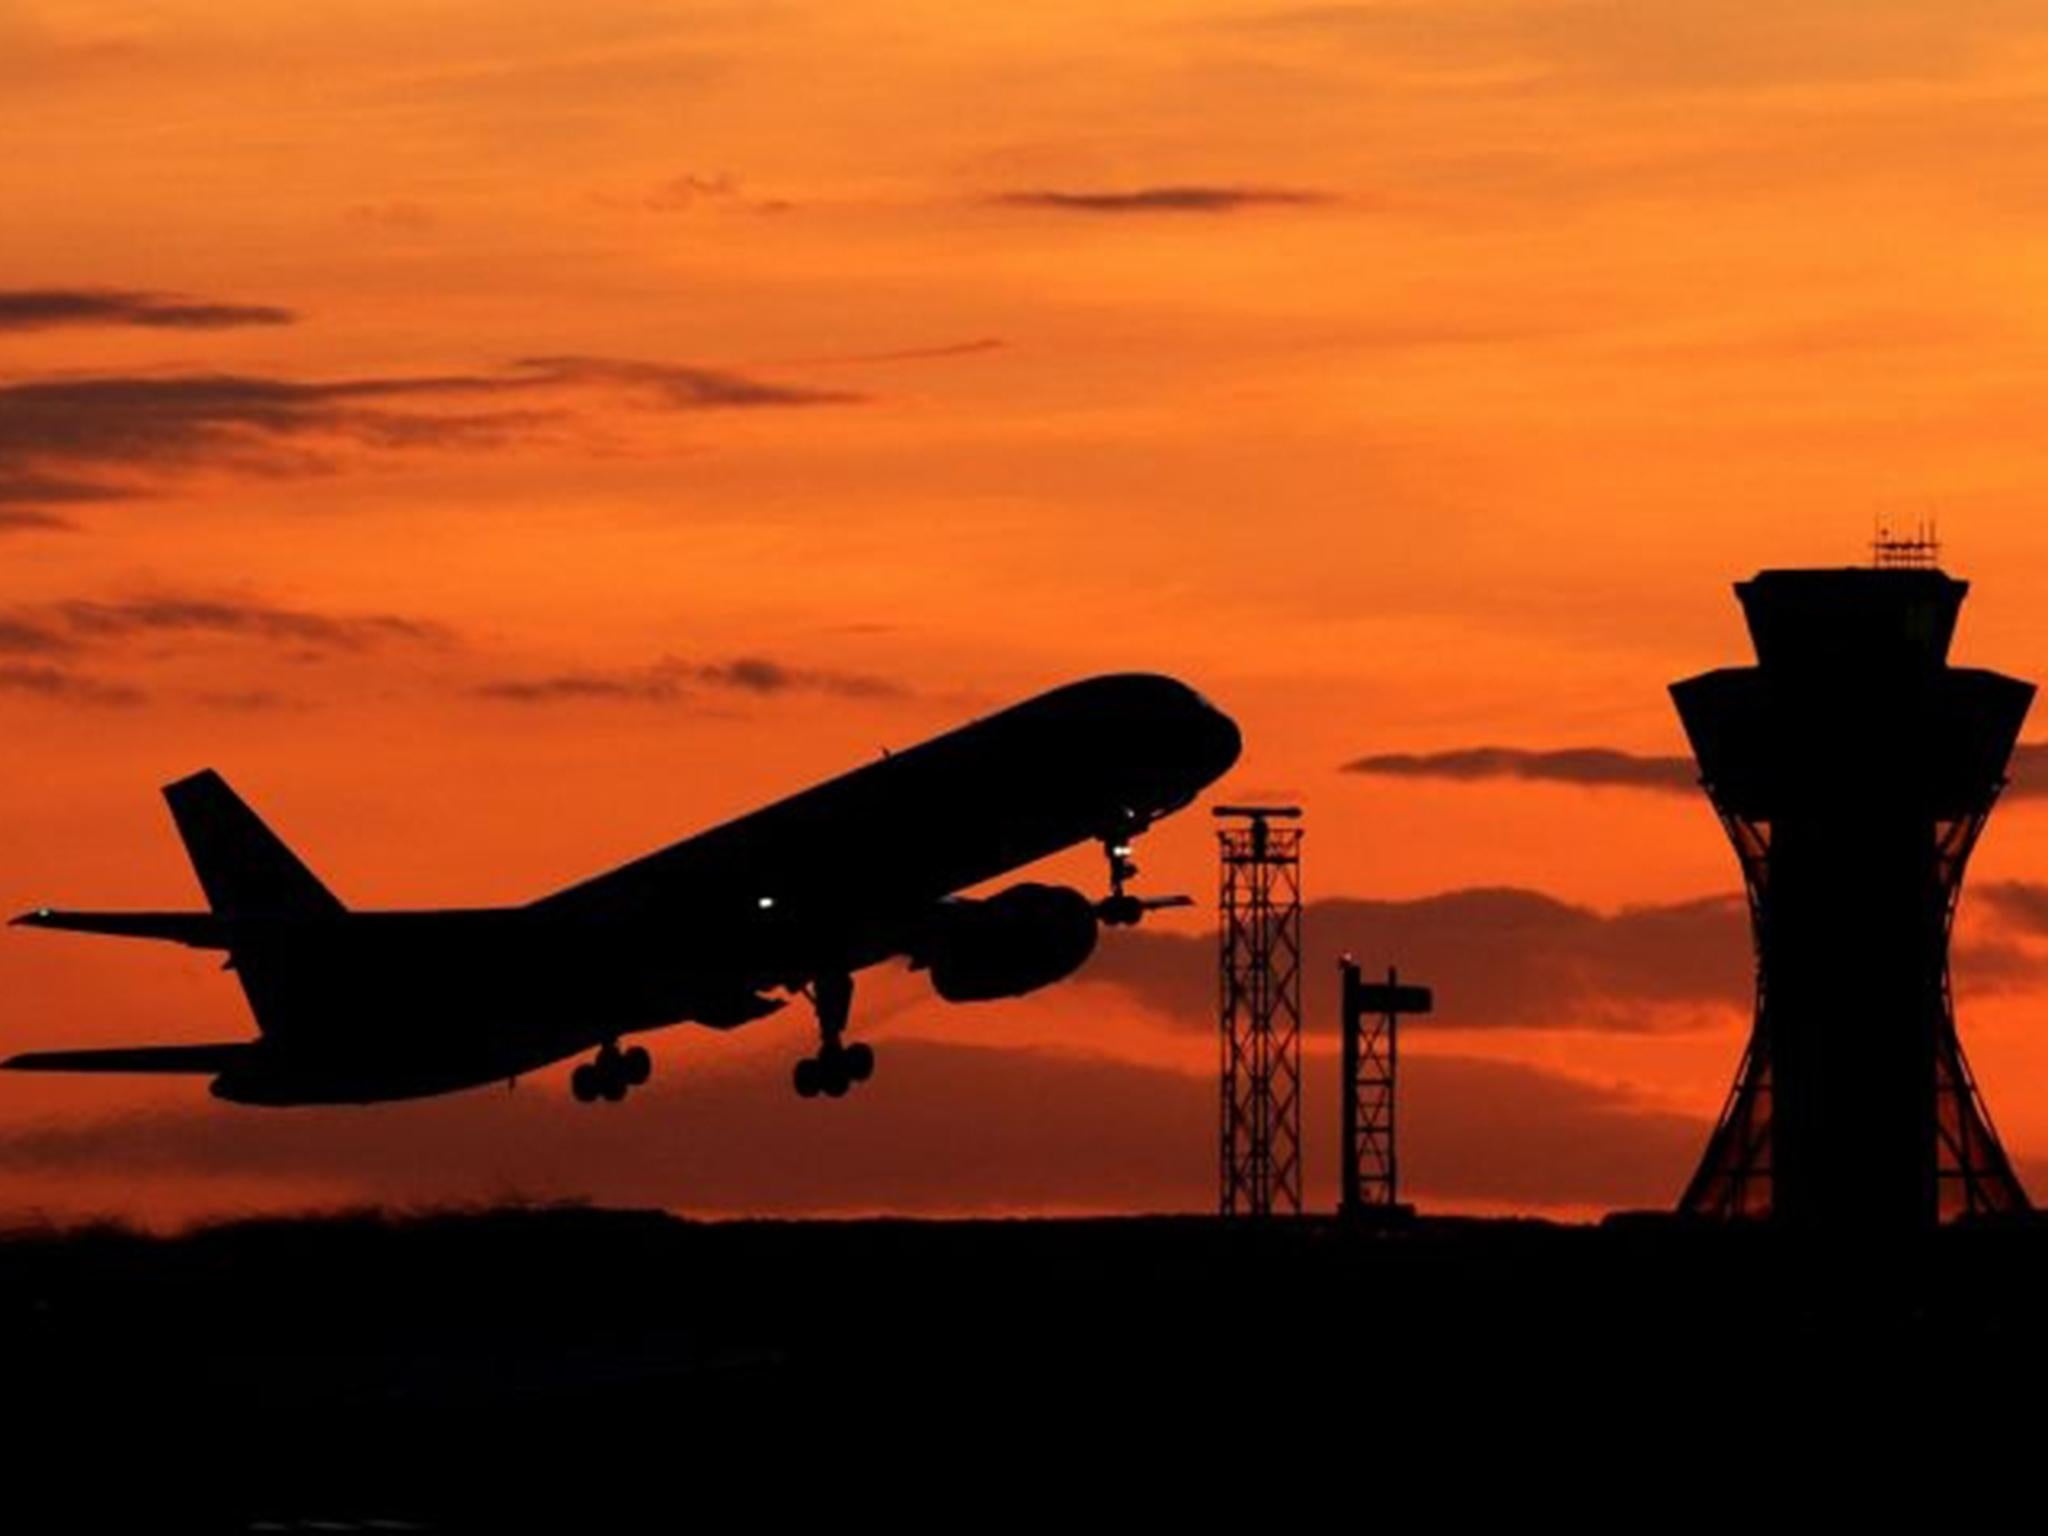 The Government has said it wants to remain part of the bloc's aviation regulatory regime